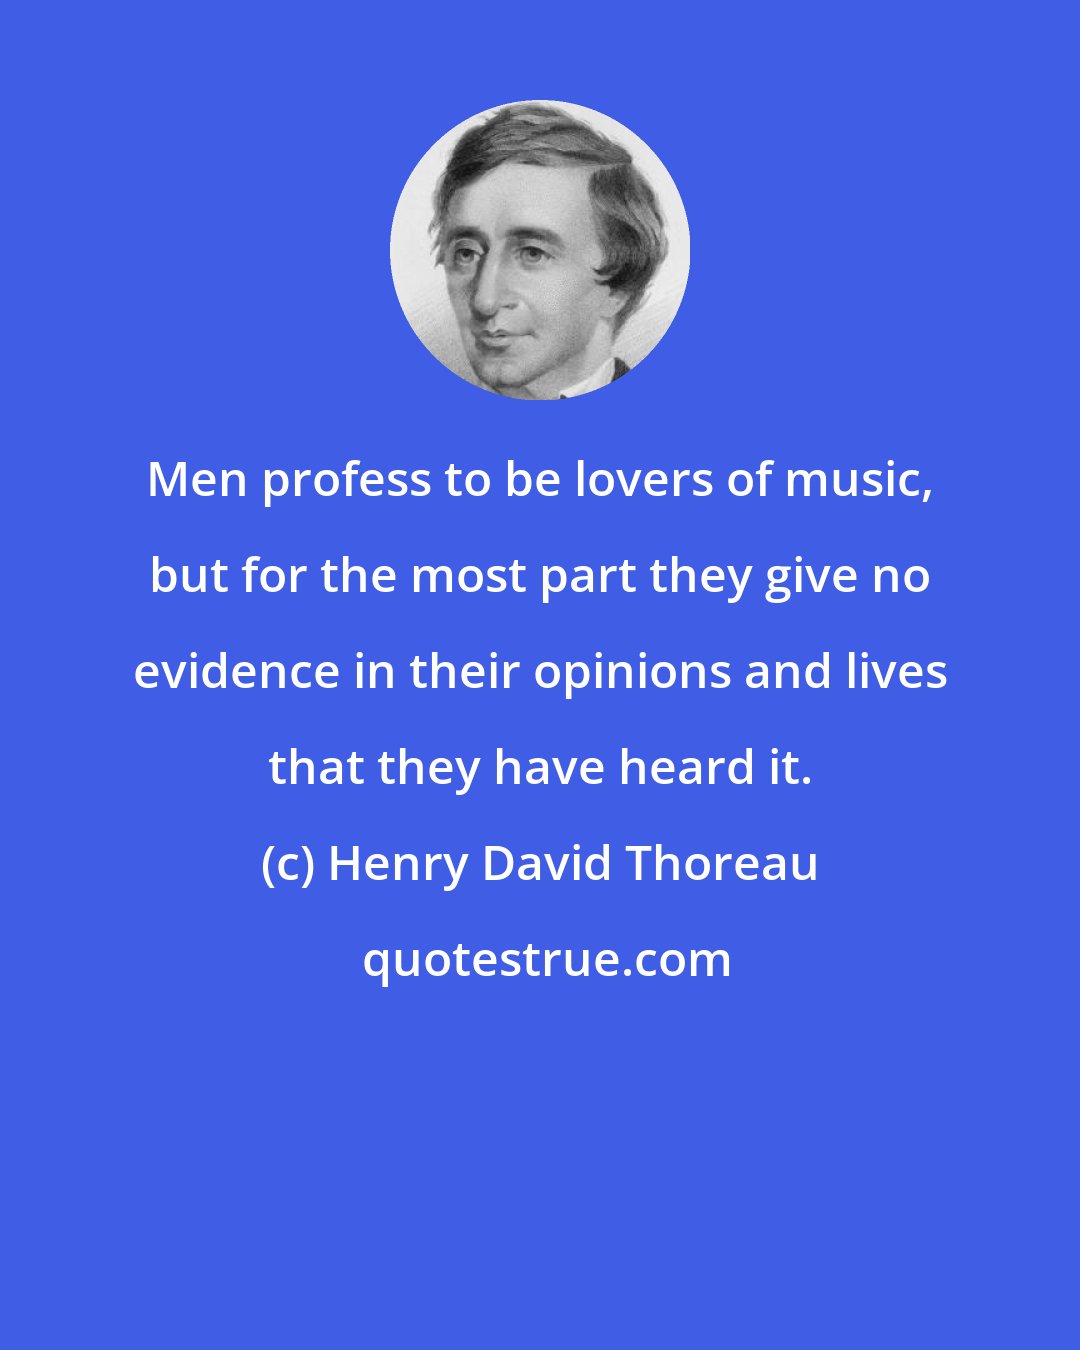 Henry David Thoreau: Men profess to be lovers of music, but for the most part they give no evidence in their opinions and lives that they have heard it.